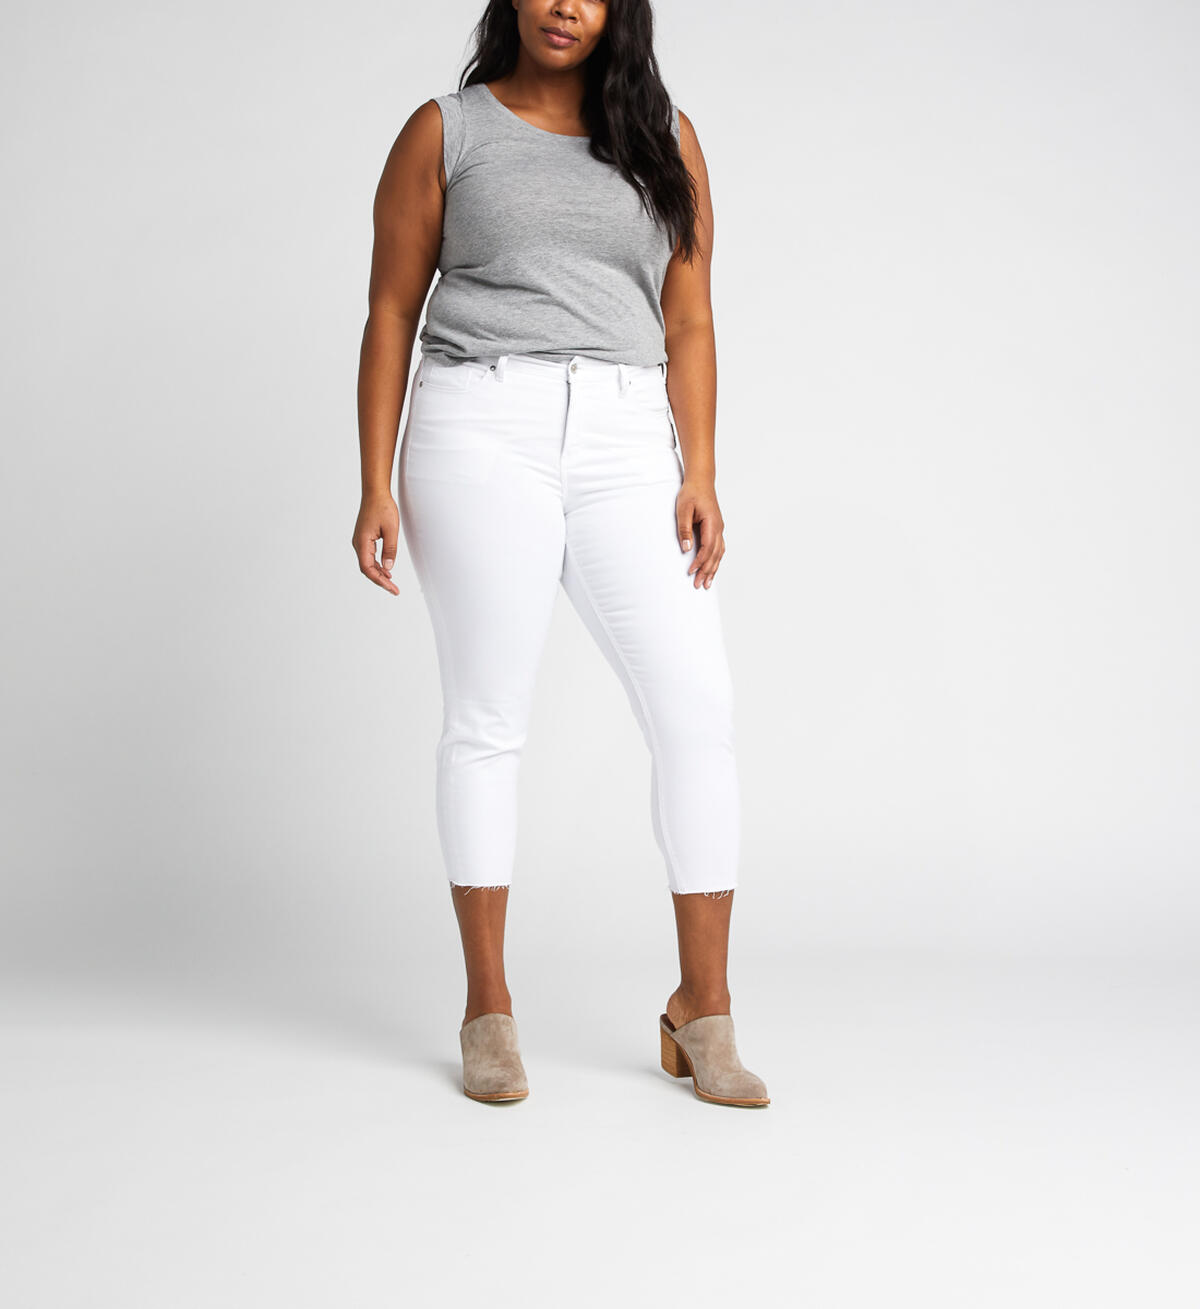 Avery High-Rise Curvy Skinny Crop Jeans, , hi-res image number 3